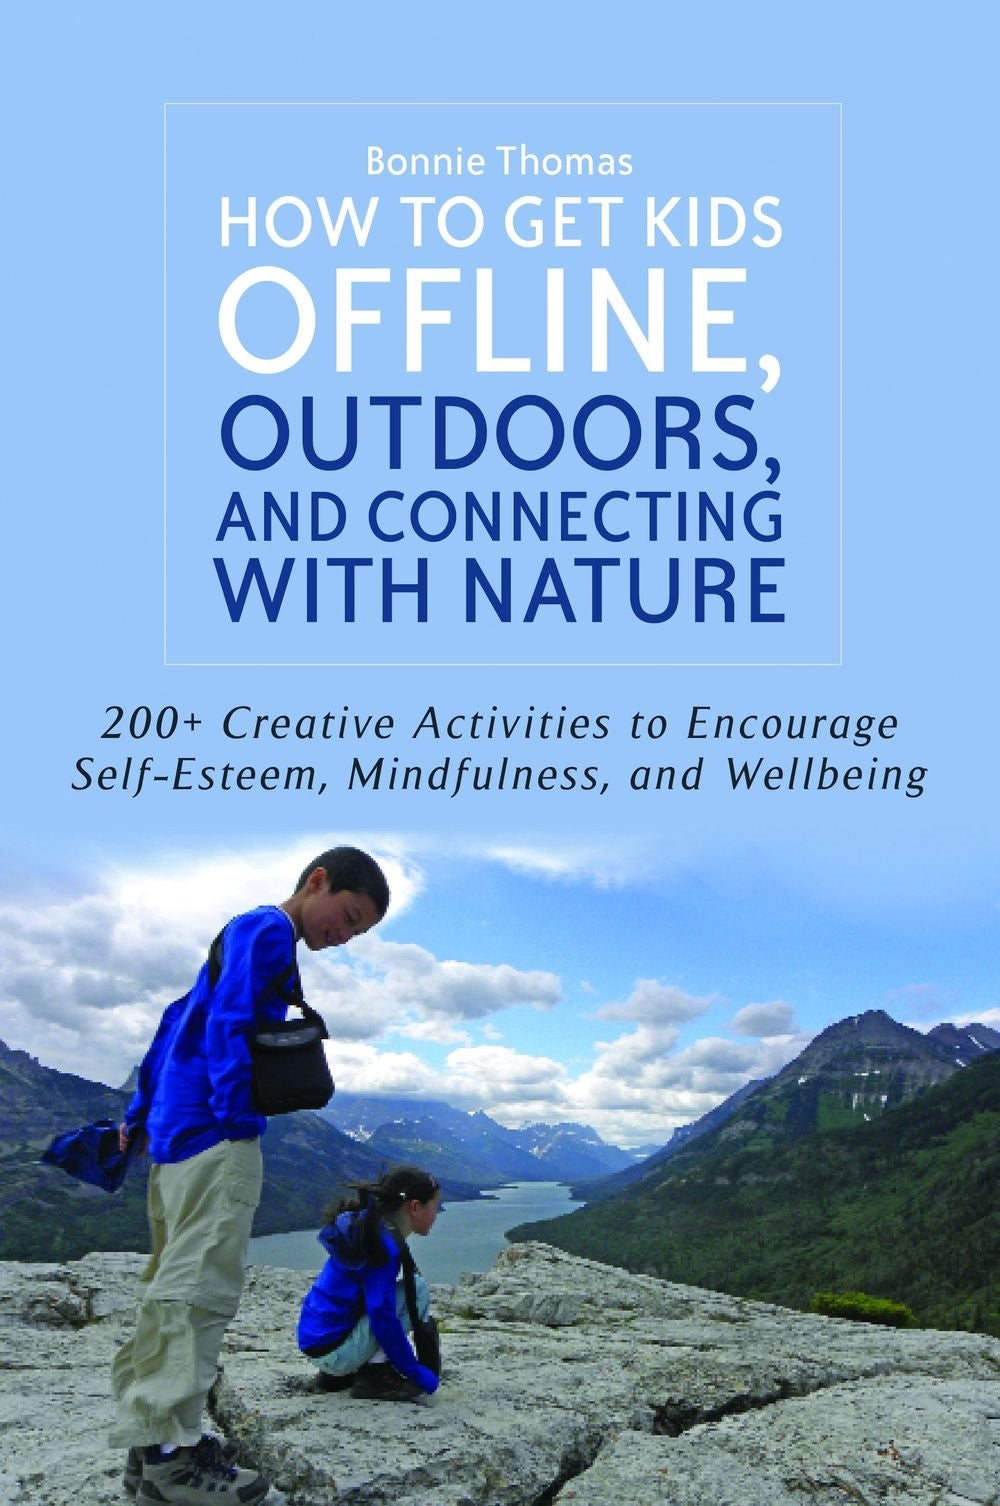 How to Get Kids Offline, Outdoors, and Connecting with Nature by Bonnie Thomas